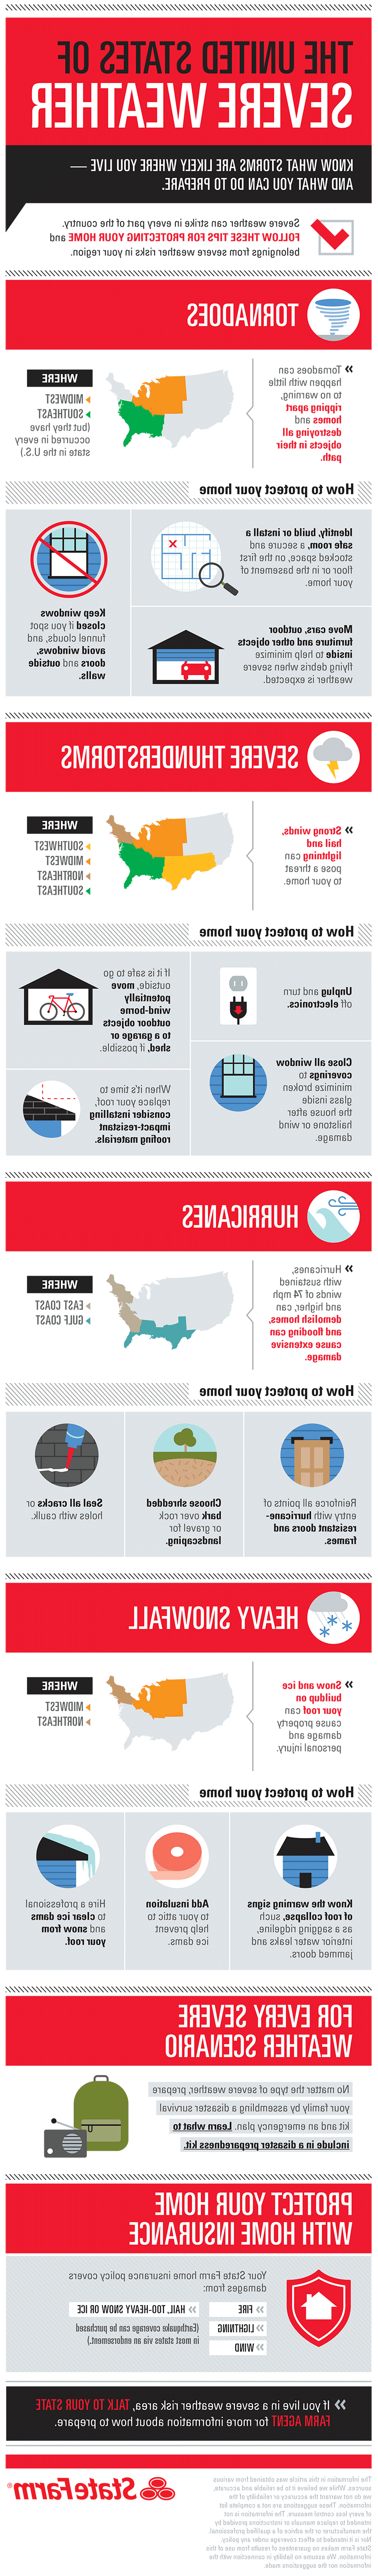 715-united-states-severe-weather-infographic